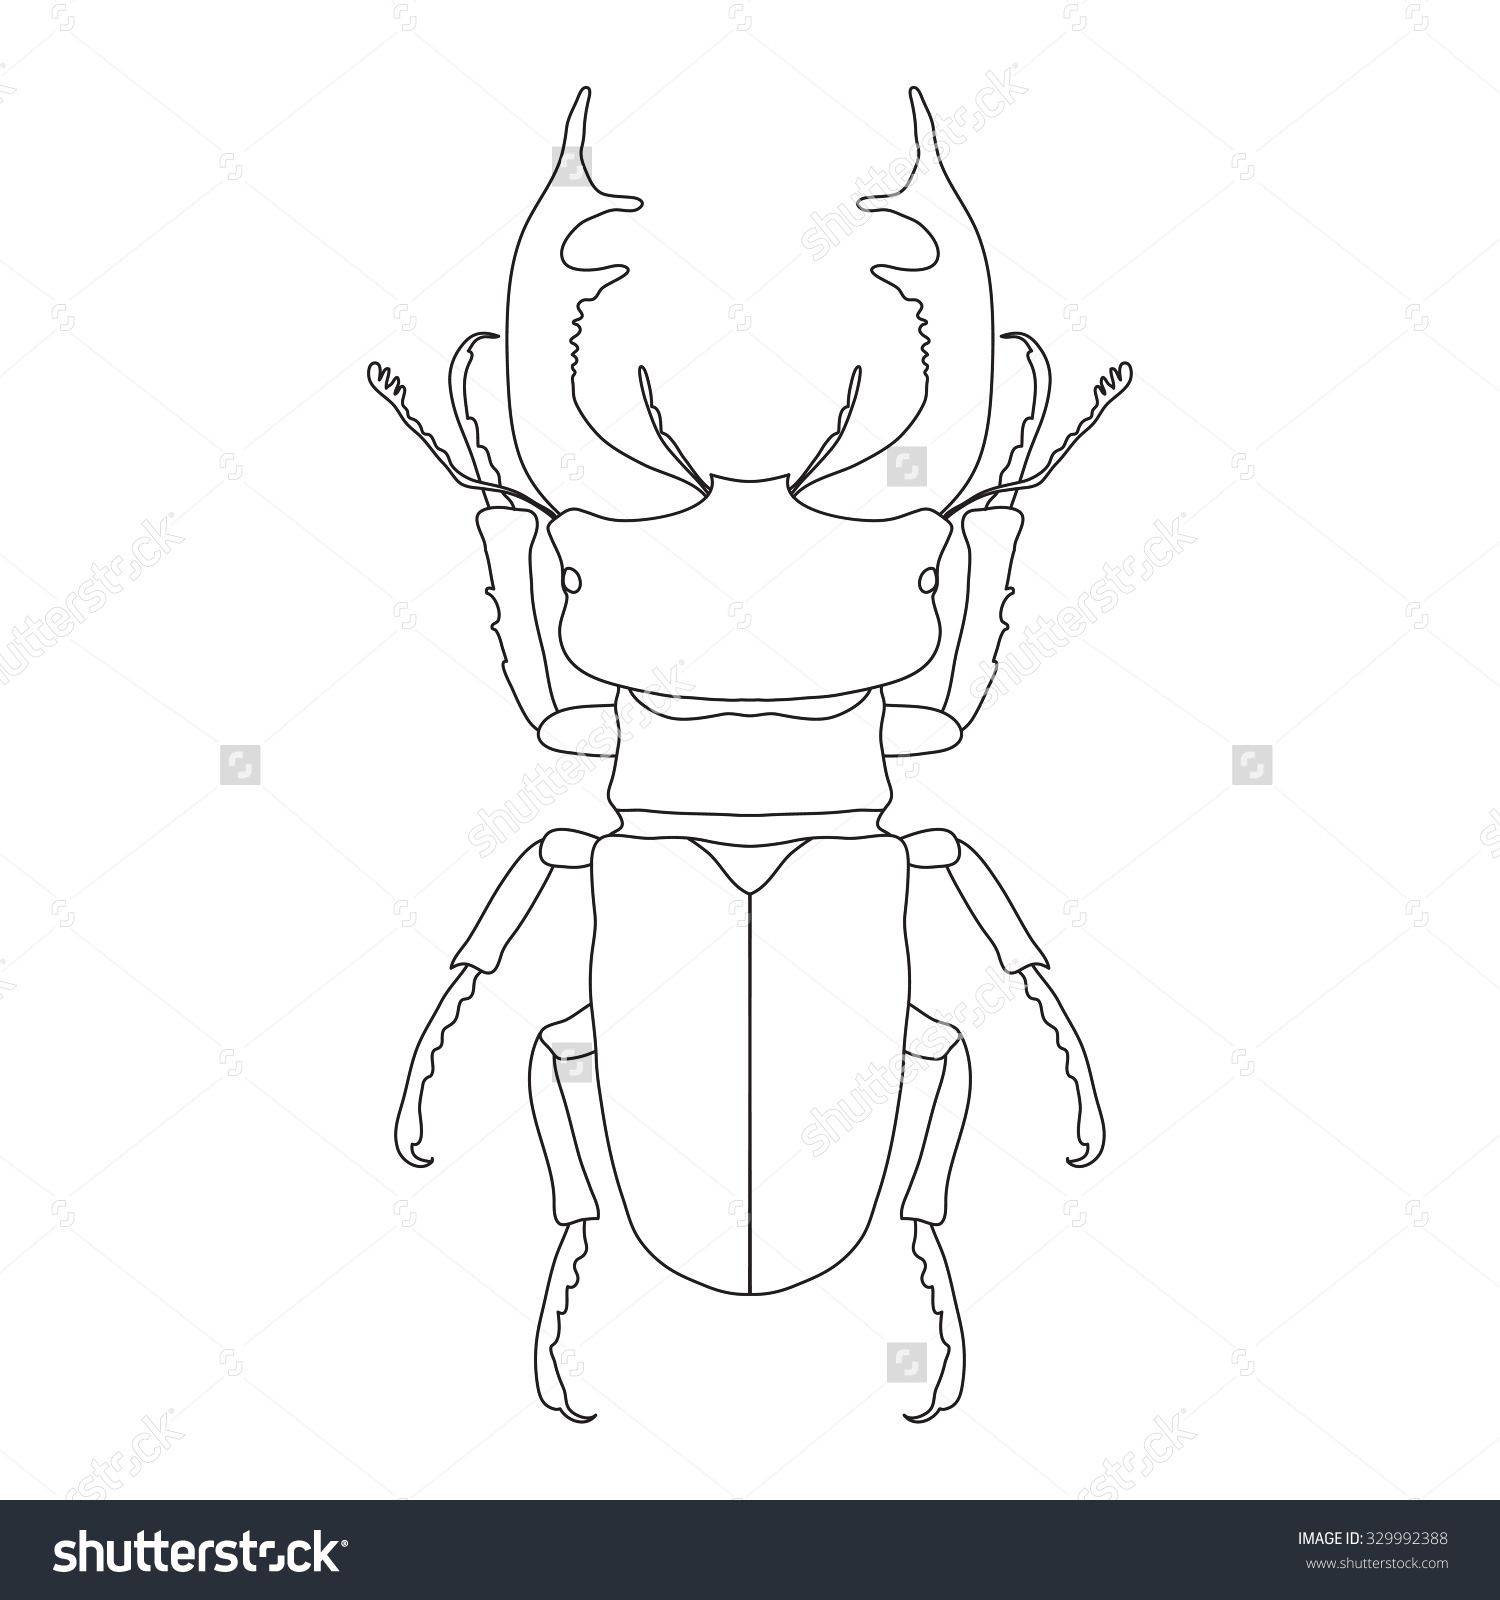 Stag Beetle coloring #1, Download drawings